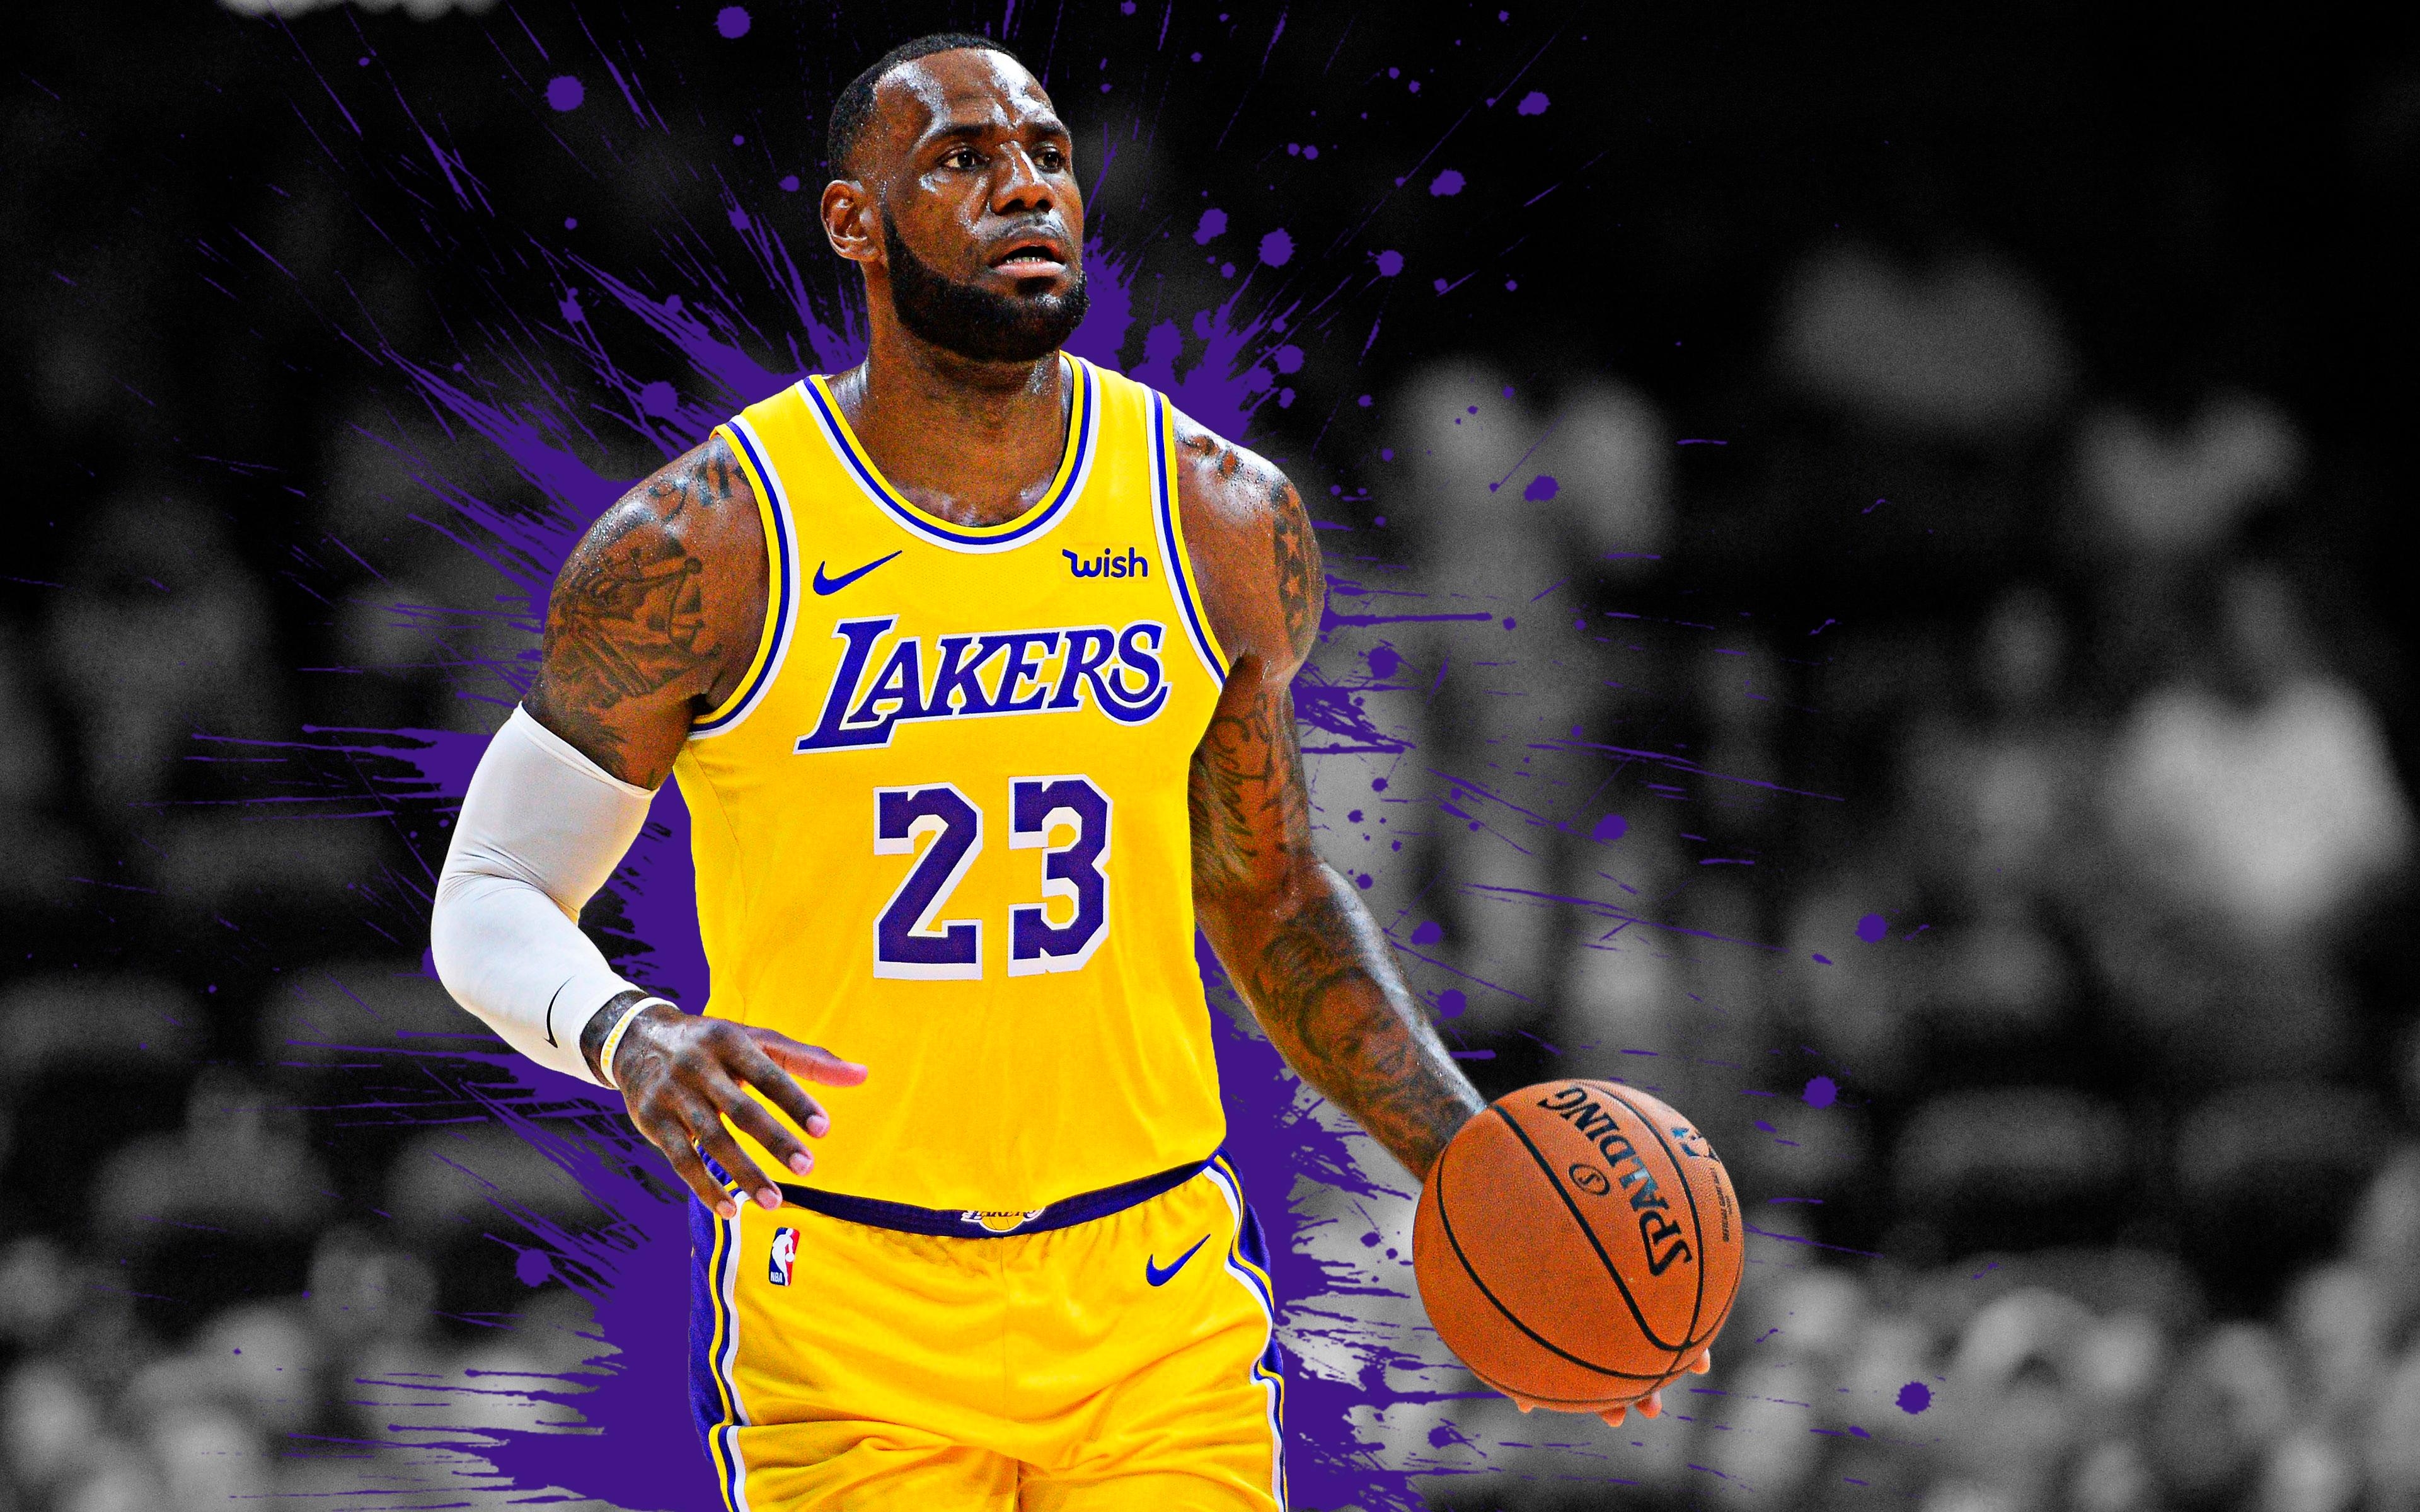 LeBron James 23 NBA Wallpaper, HD Sports 4K Wallpapers, Images, Photos and  Background - Wallpapers Den